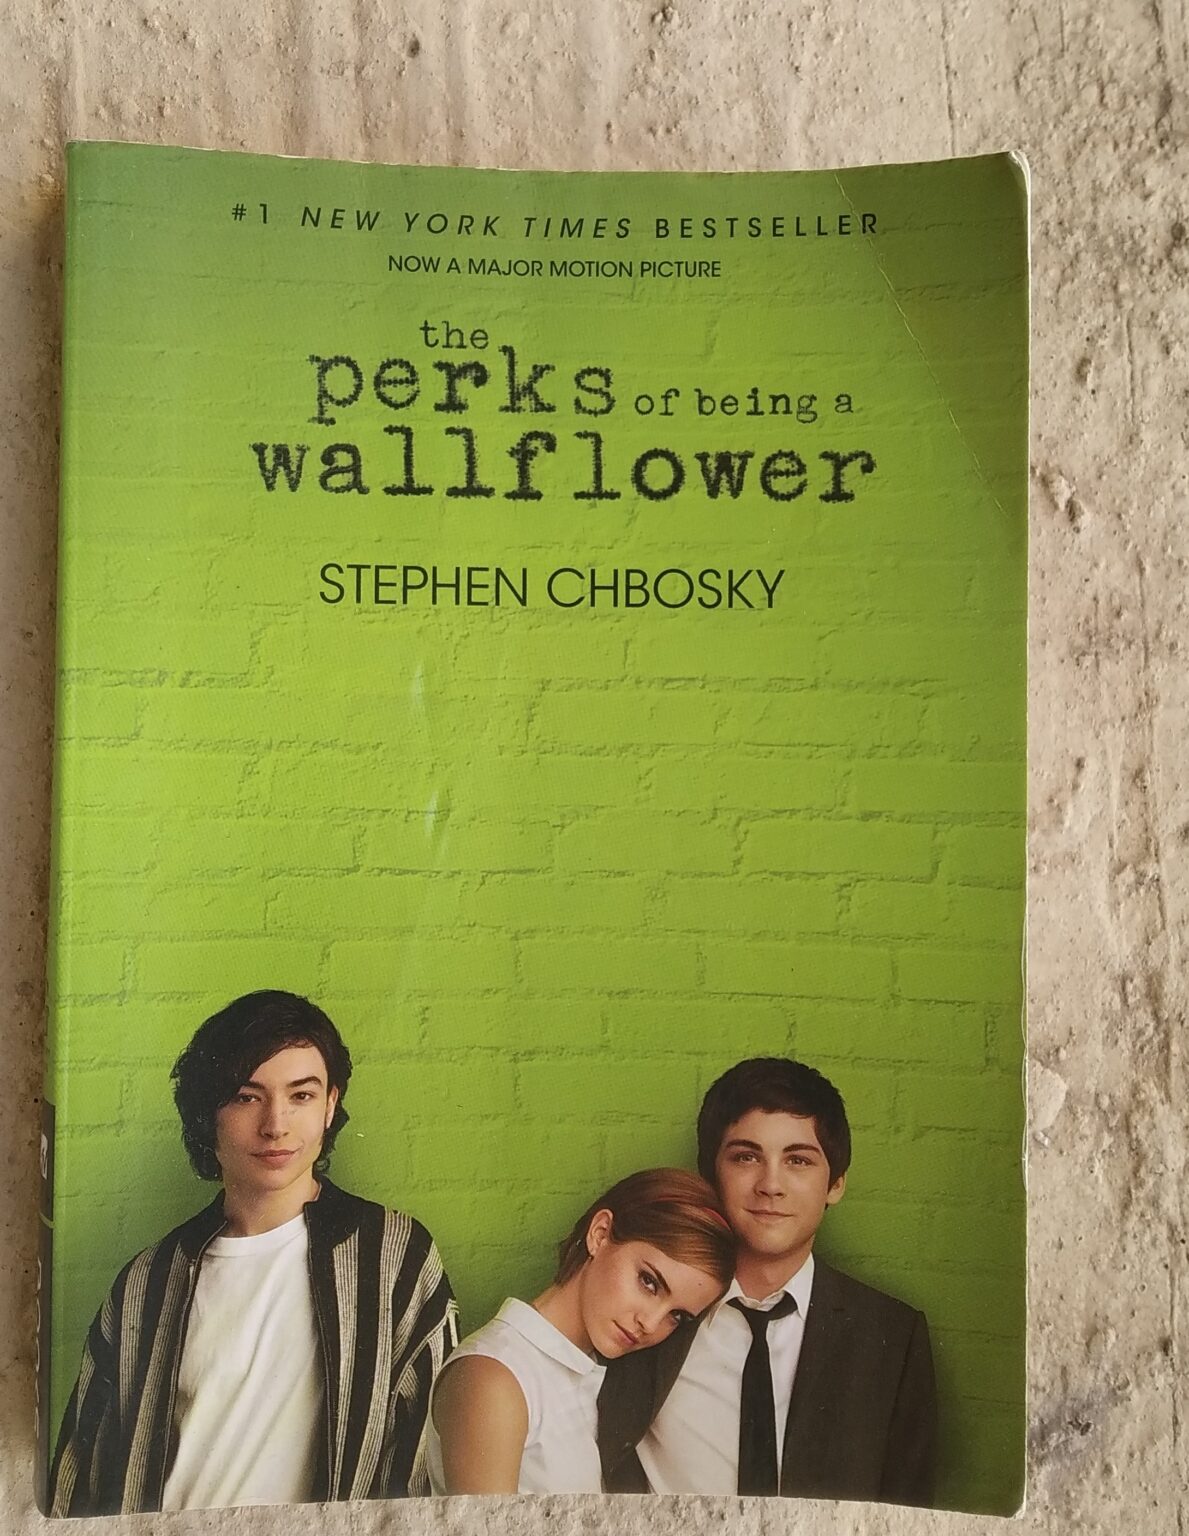 book review on perks of being a wallflower